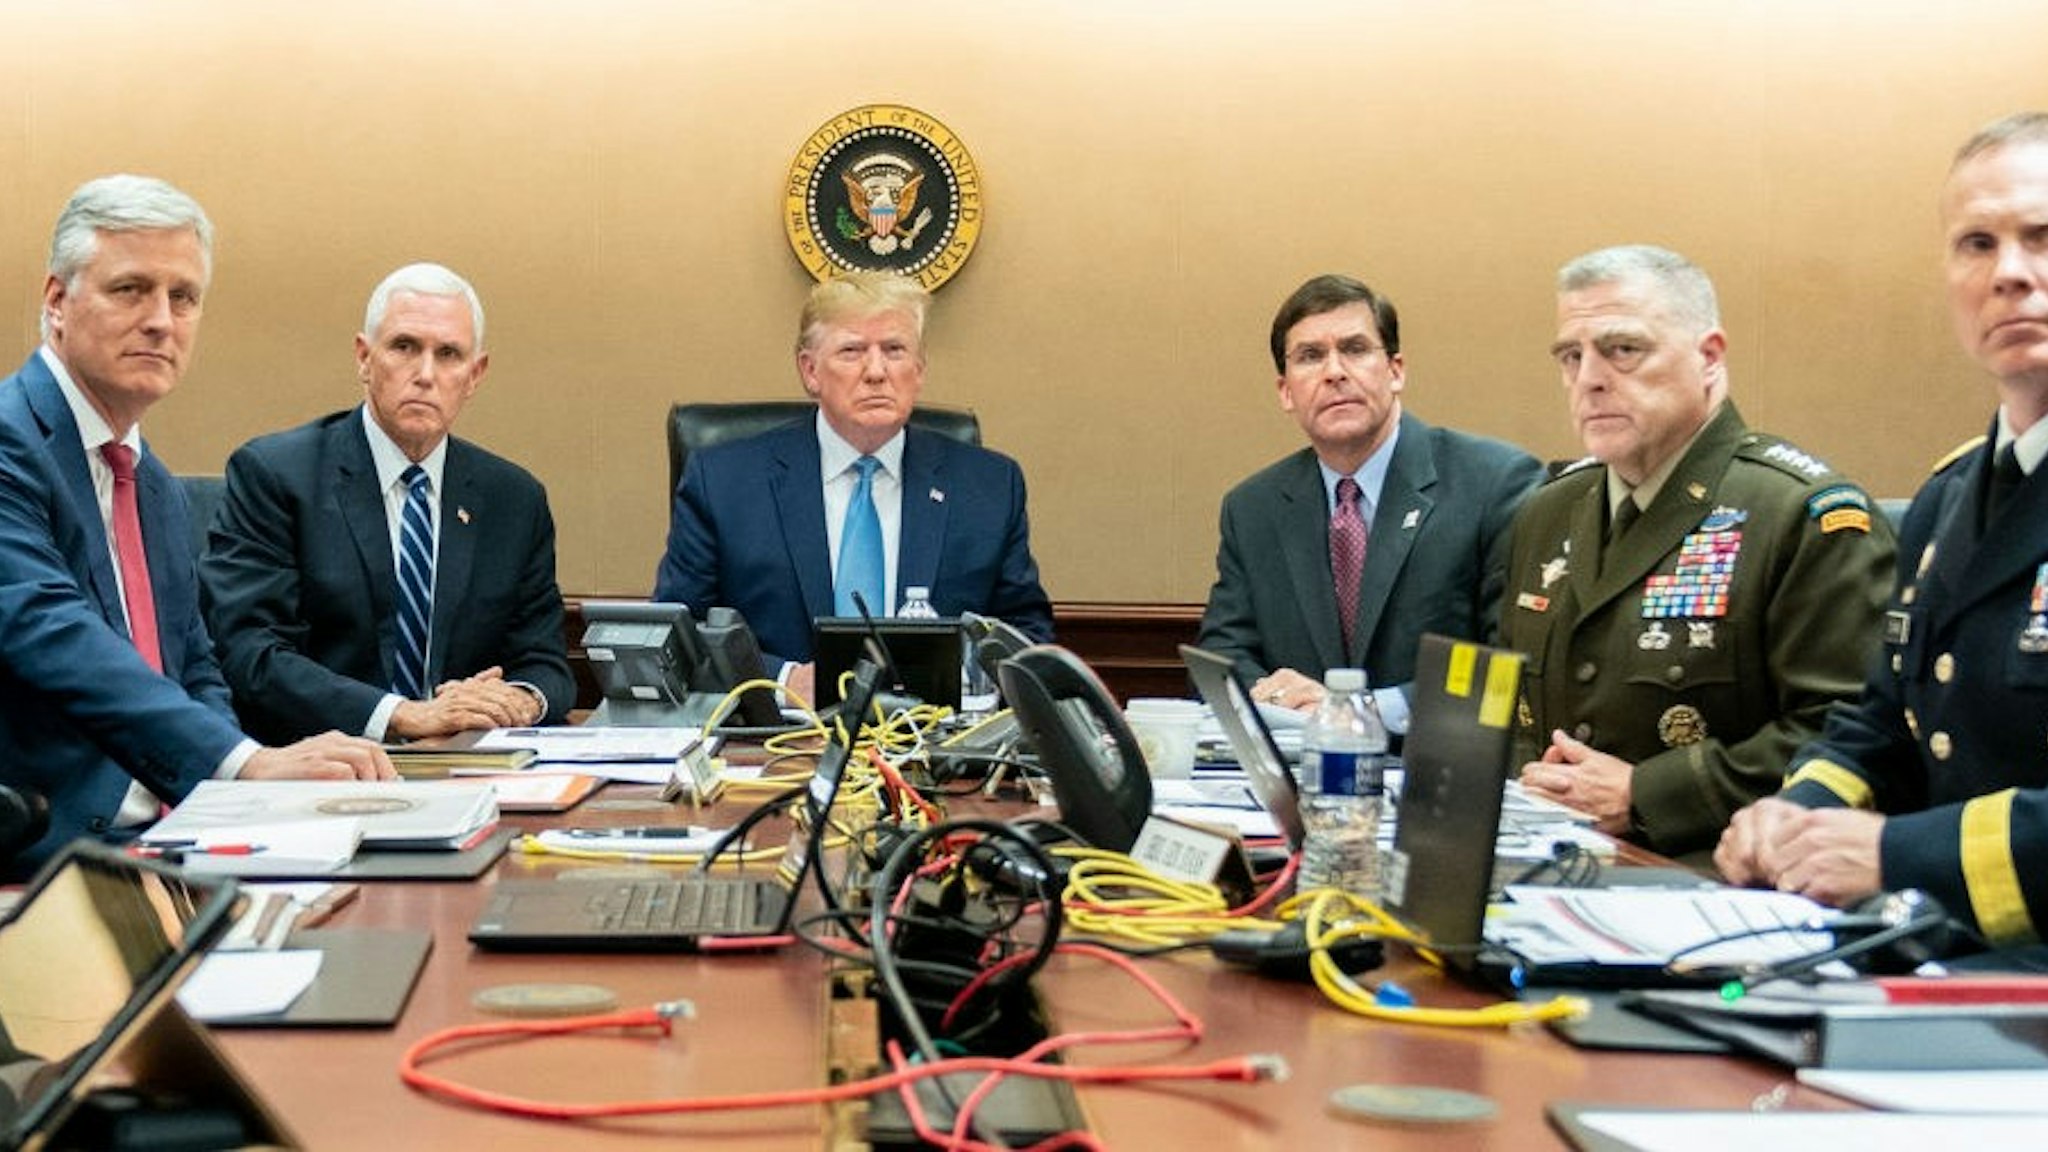 In this handout photo provided by the White House, President Donald J. Trump is joined by Vice President Mike Pence (2nd L), National Security Advisor Robert O’Brien (L), Secretary of Defense Mark Esper (3rd R), Chairman of the Joint Chiefs of Staff U.S. Army General Mark A. Milley (2nd R) and Brig. Gen. Marcus Evans, Deputy Director for Special Operations on the Joint Staff in the Situation Room of the White House October 26, 2019 in Washington, DC. The President was monitoring developments as U.S. Special Operations forces close in on ISIS leader Abu Bakr al-Baghdadi’s compound in Syria with a mission to kill or capture the terrorist. (Photo by Shealah Craighead/The White House via Getty Images)